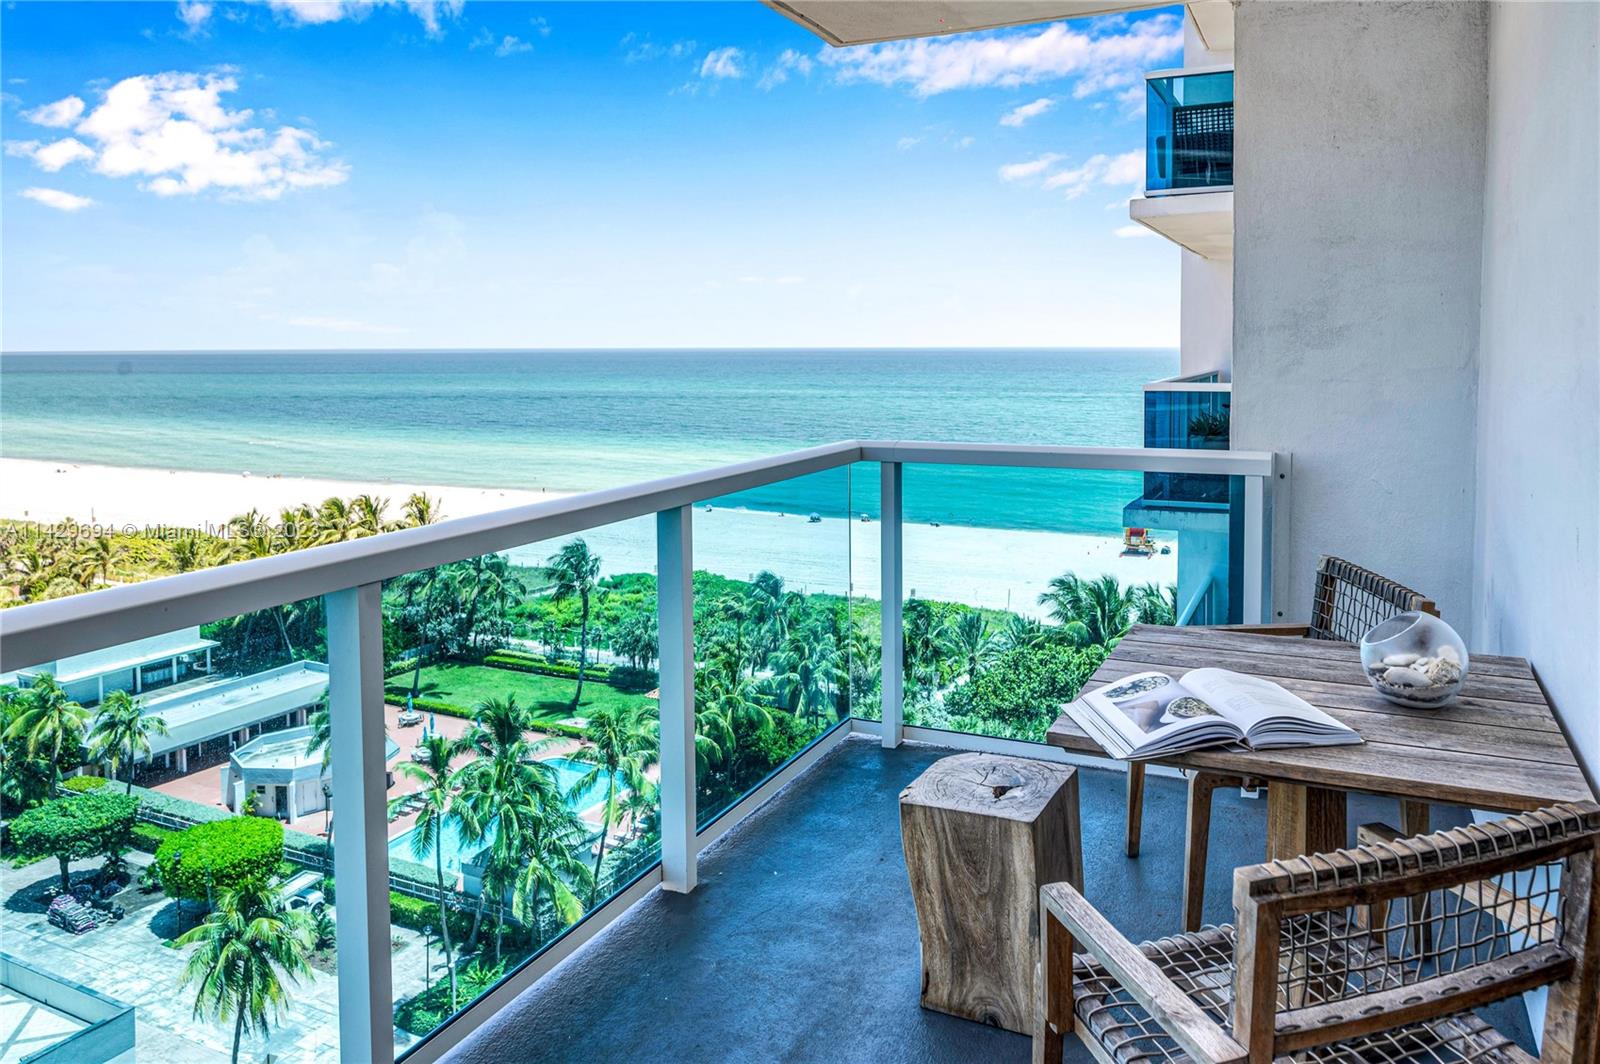 Do not miss the opportunity of owning this Spectacular unit at the 1 Hotel & Homes. Great investment with flexible rental policy with the option to rent privately, personal use or through the hotel program. The unit is currently making return over 8%. This 1 bedroom 1.5 baths is fully furnished by famous Brazilian designer Debora Aguiar. Amazing ocean view. Acclaimed 5-Star Condo Hotel offering 4 swimming pools including the hotel's stunning rooftop pool and bar. Access full service 14,000 square feet Spa and Fitness Center. 24-hour concierge, on-demand maintenance services, access to hotel facilities including meeting rooms, business center, private residential lobby and much more. Top location in South Beach!